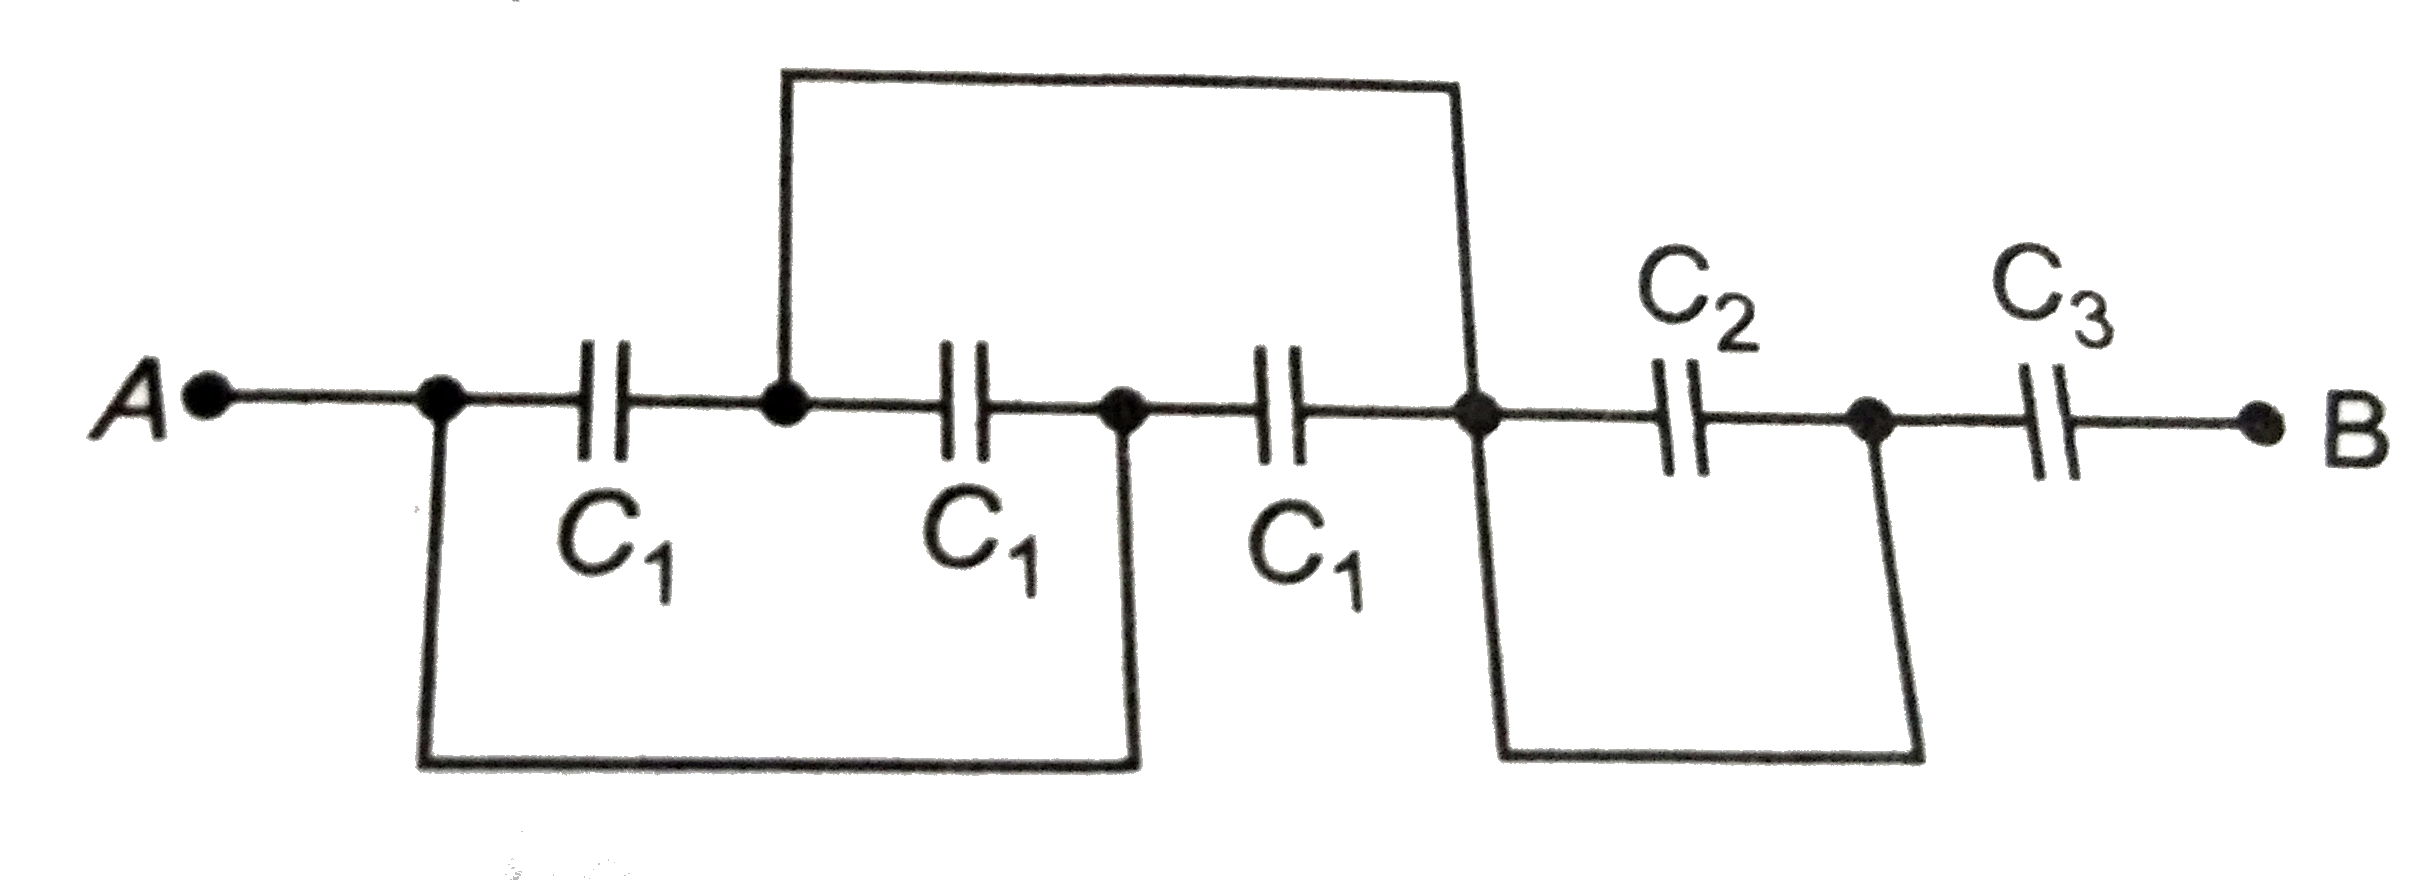 A circuit is shown in figure for which C(1)=(3pm 0.011)muF, C(2)=(5pm 0.01)muF and C(3)=(1pm 0.01)muF. If C is the equivalent capacitance across AB, then C is given by